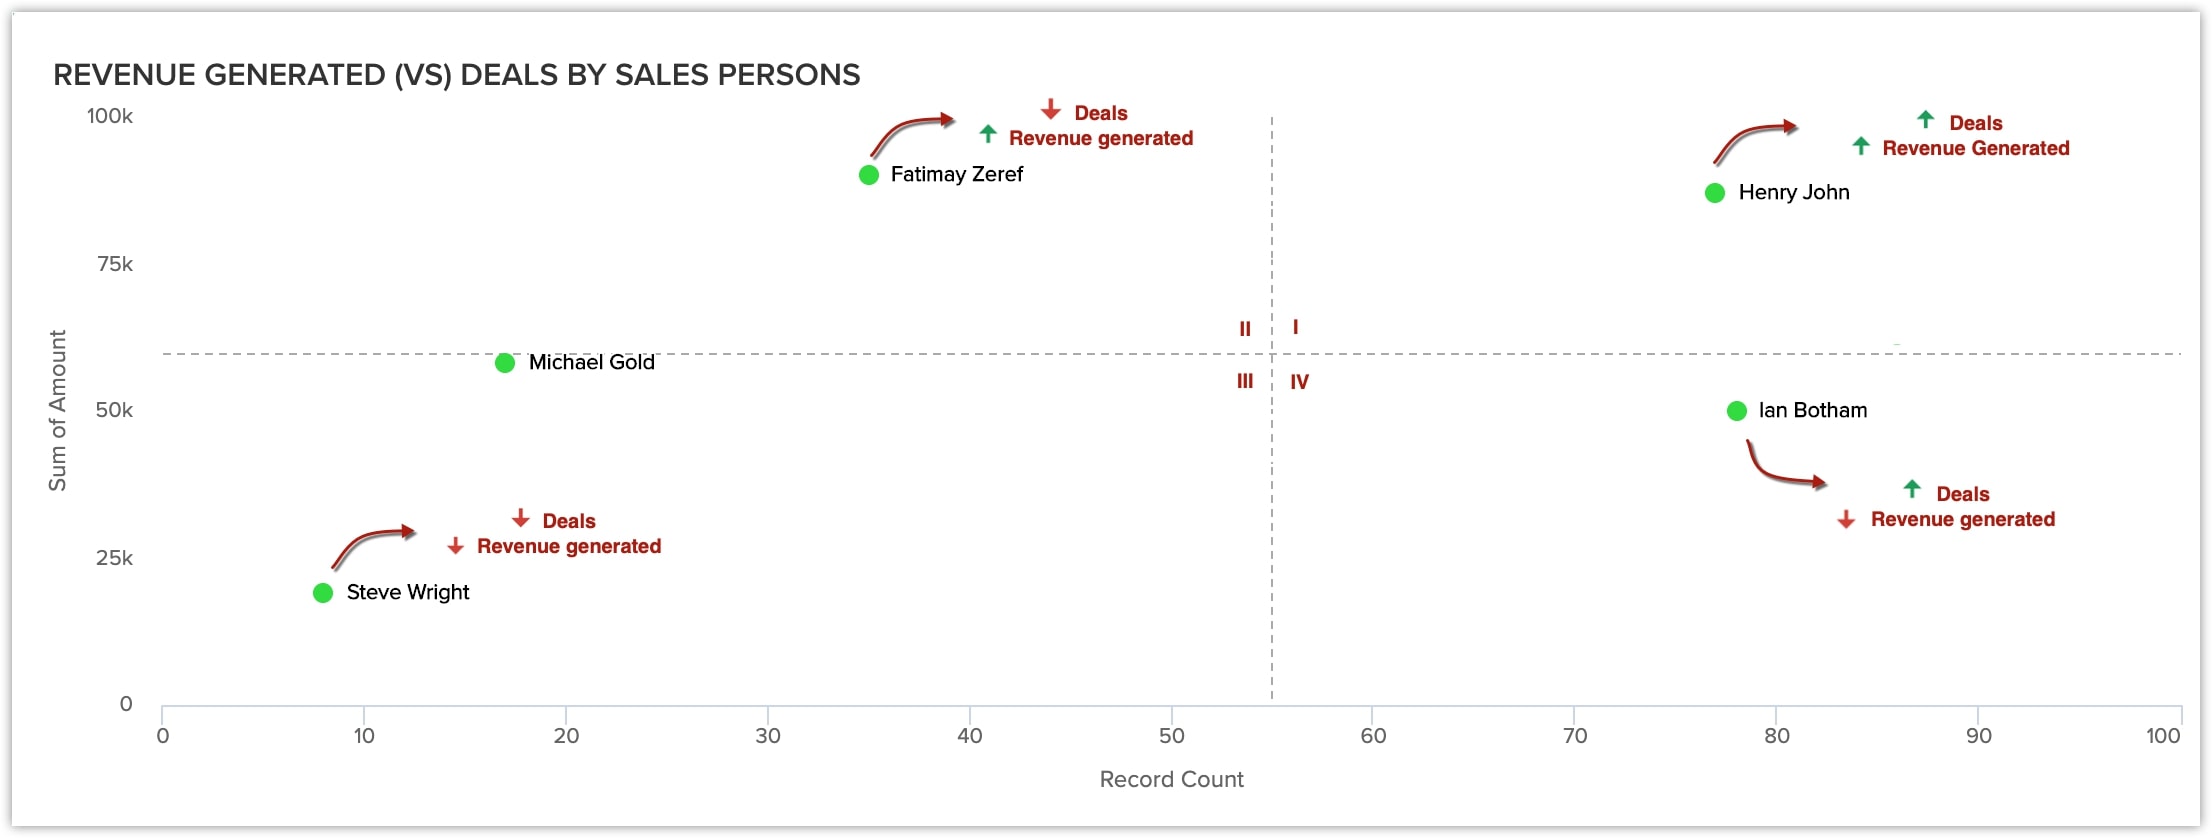 REVENUE GENERATED (VS) DEALS BY SALES PERSONS ZOHO CRM